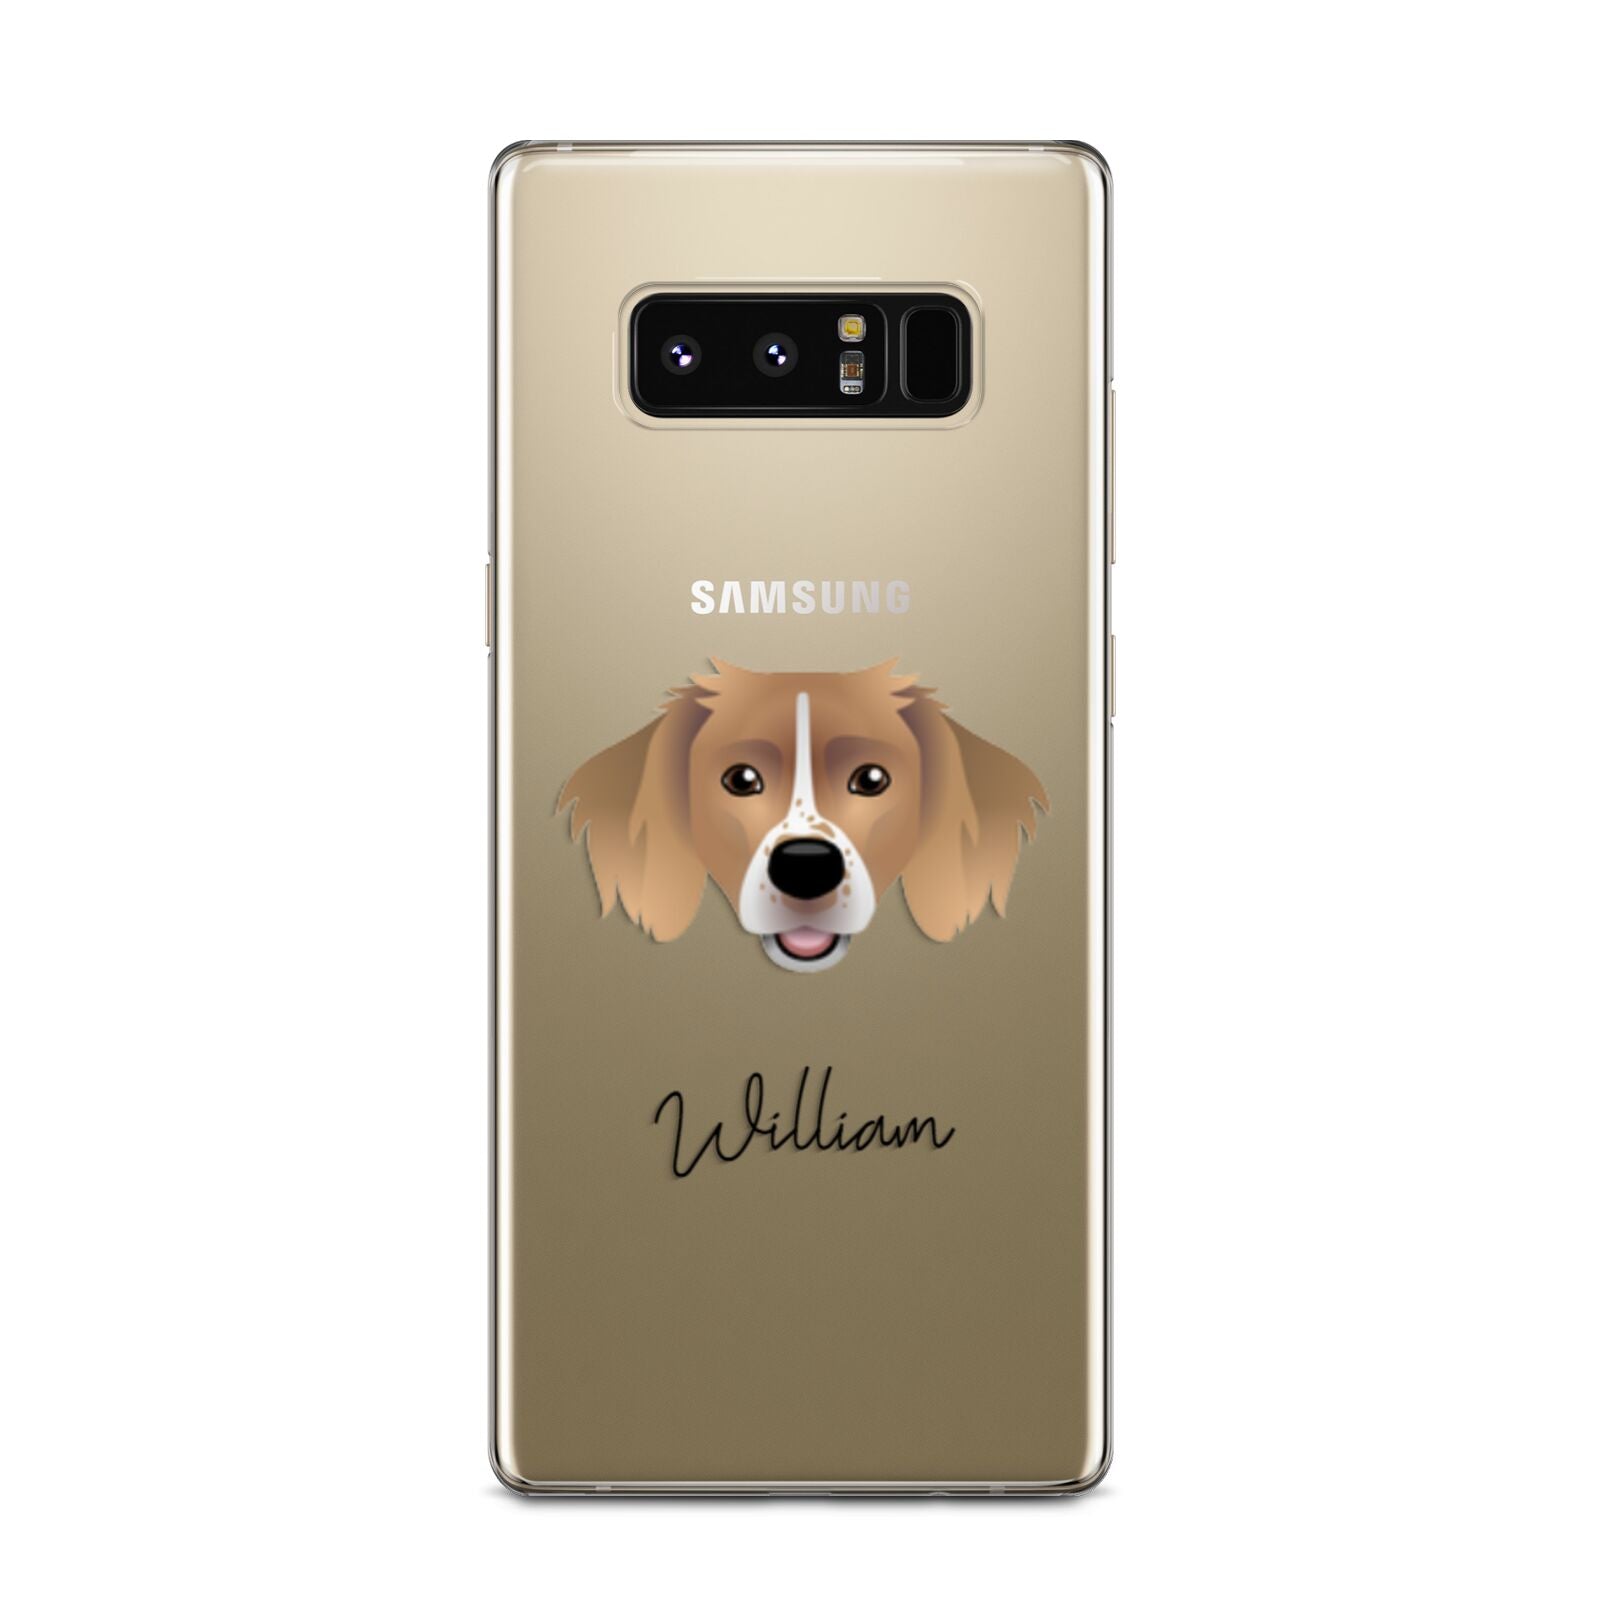 Sprollie Personalised Samsung Galaxy Note 8 Case